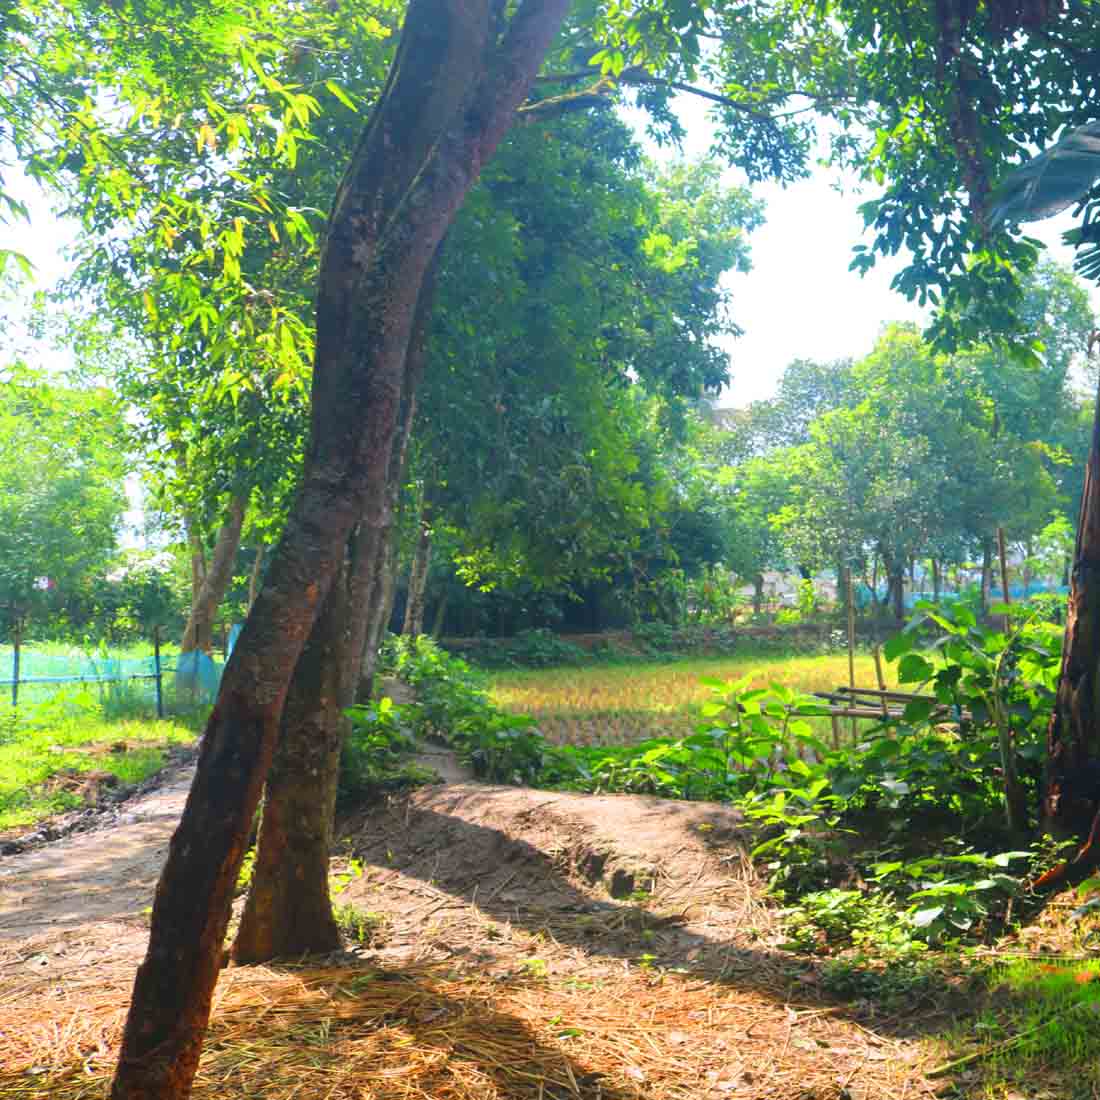 Natural Tree village people & roads stock photos in Bangladesh preview image.